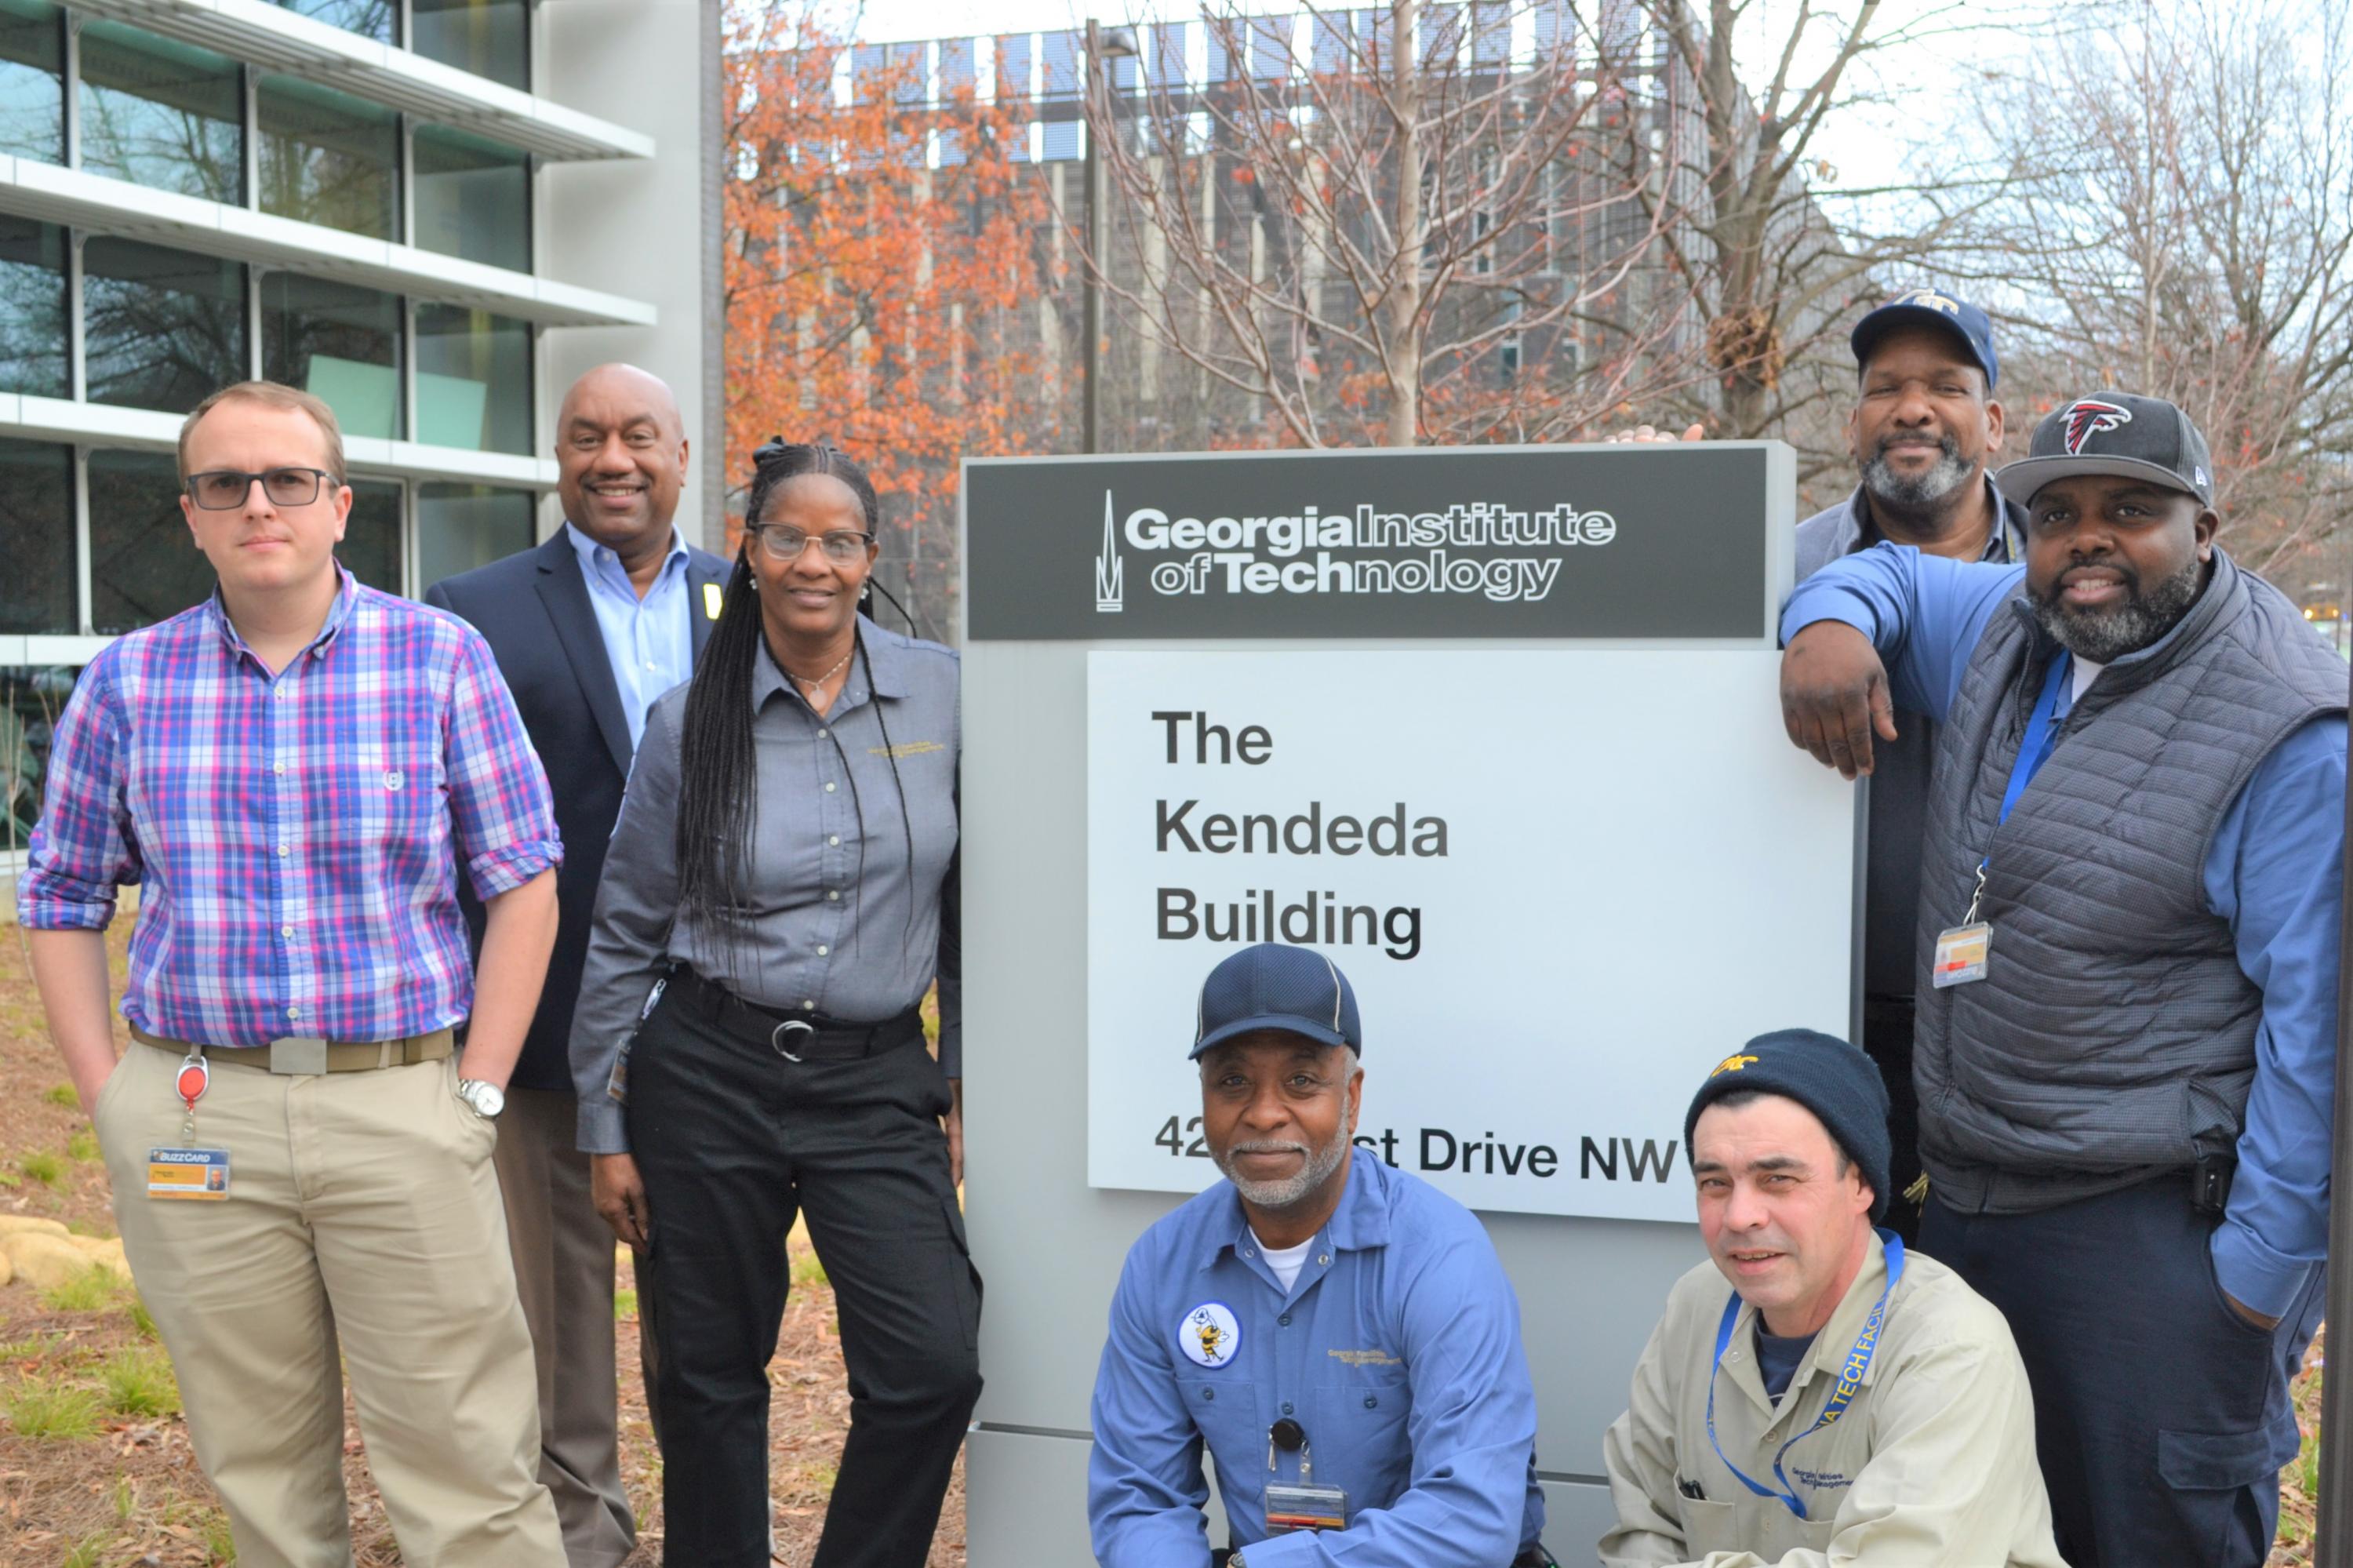 The Kendeda Building Operations team from left to right: Alex Gurciullo, Marlon Ellis, Marilyn Lofton, Johnny Rand, Steve Place, Ron Wormley, and Dexter Harper.

 